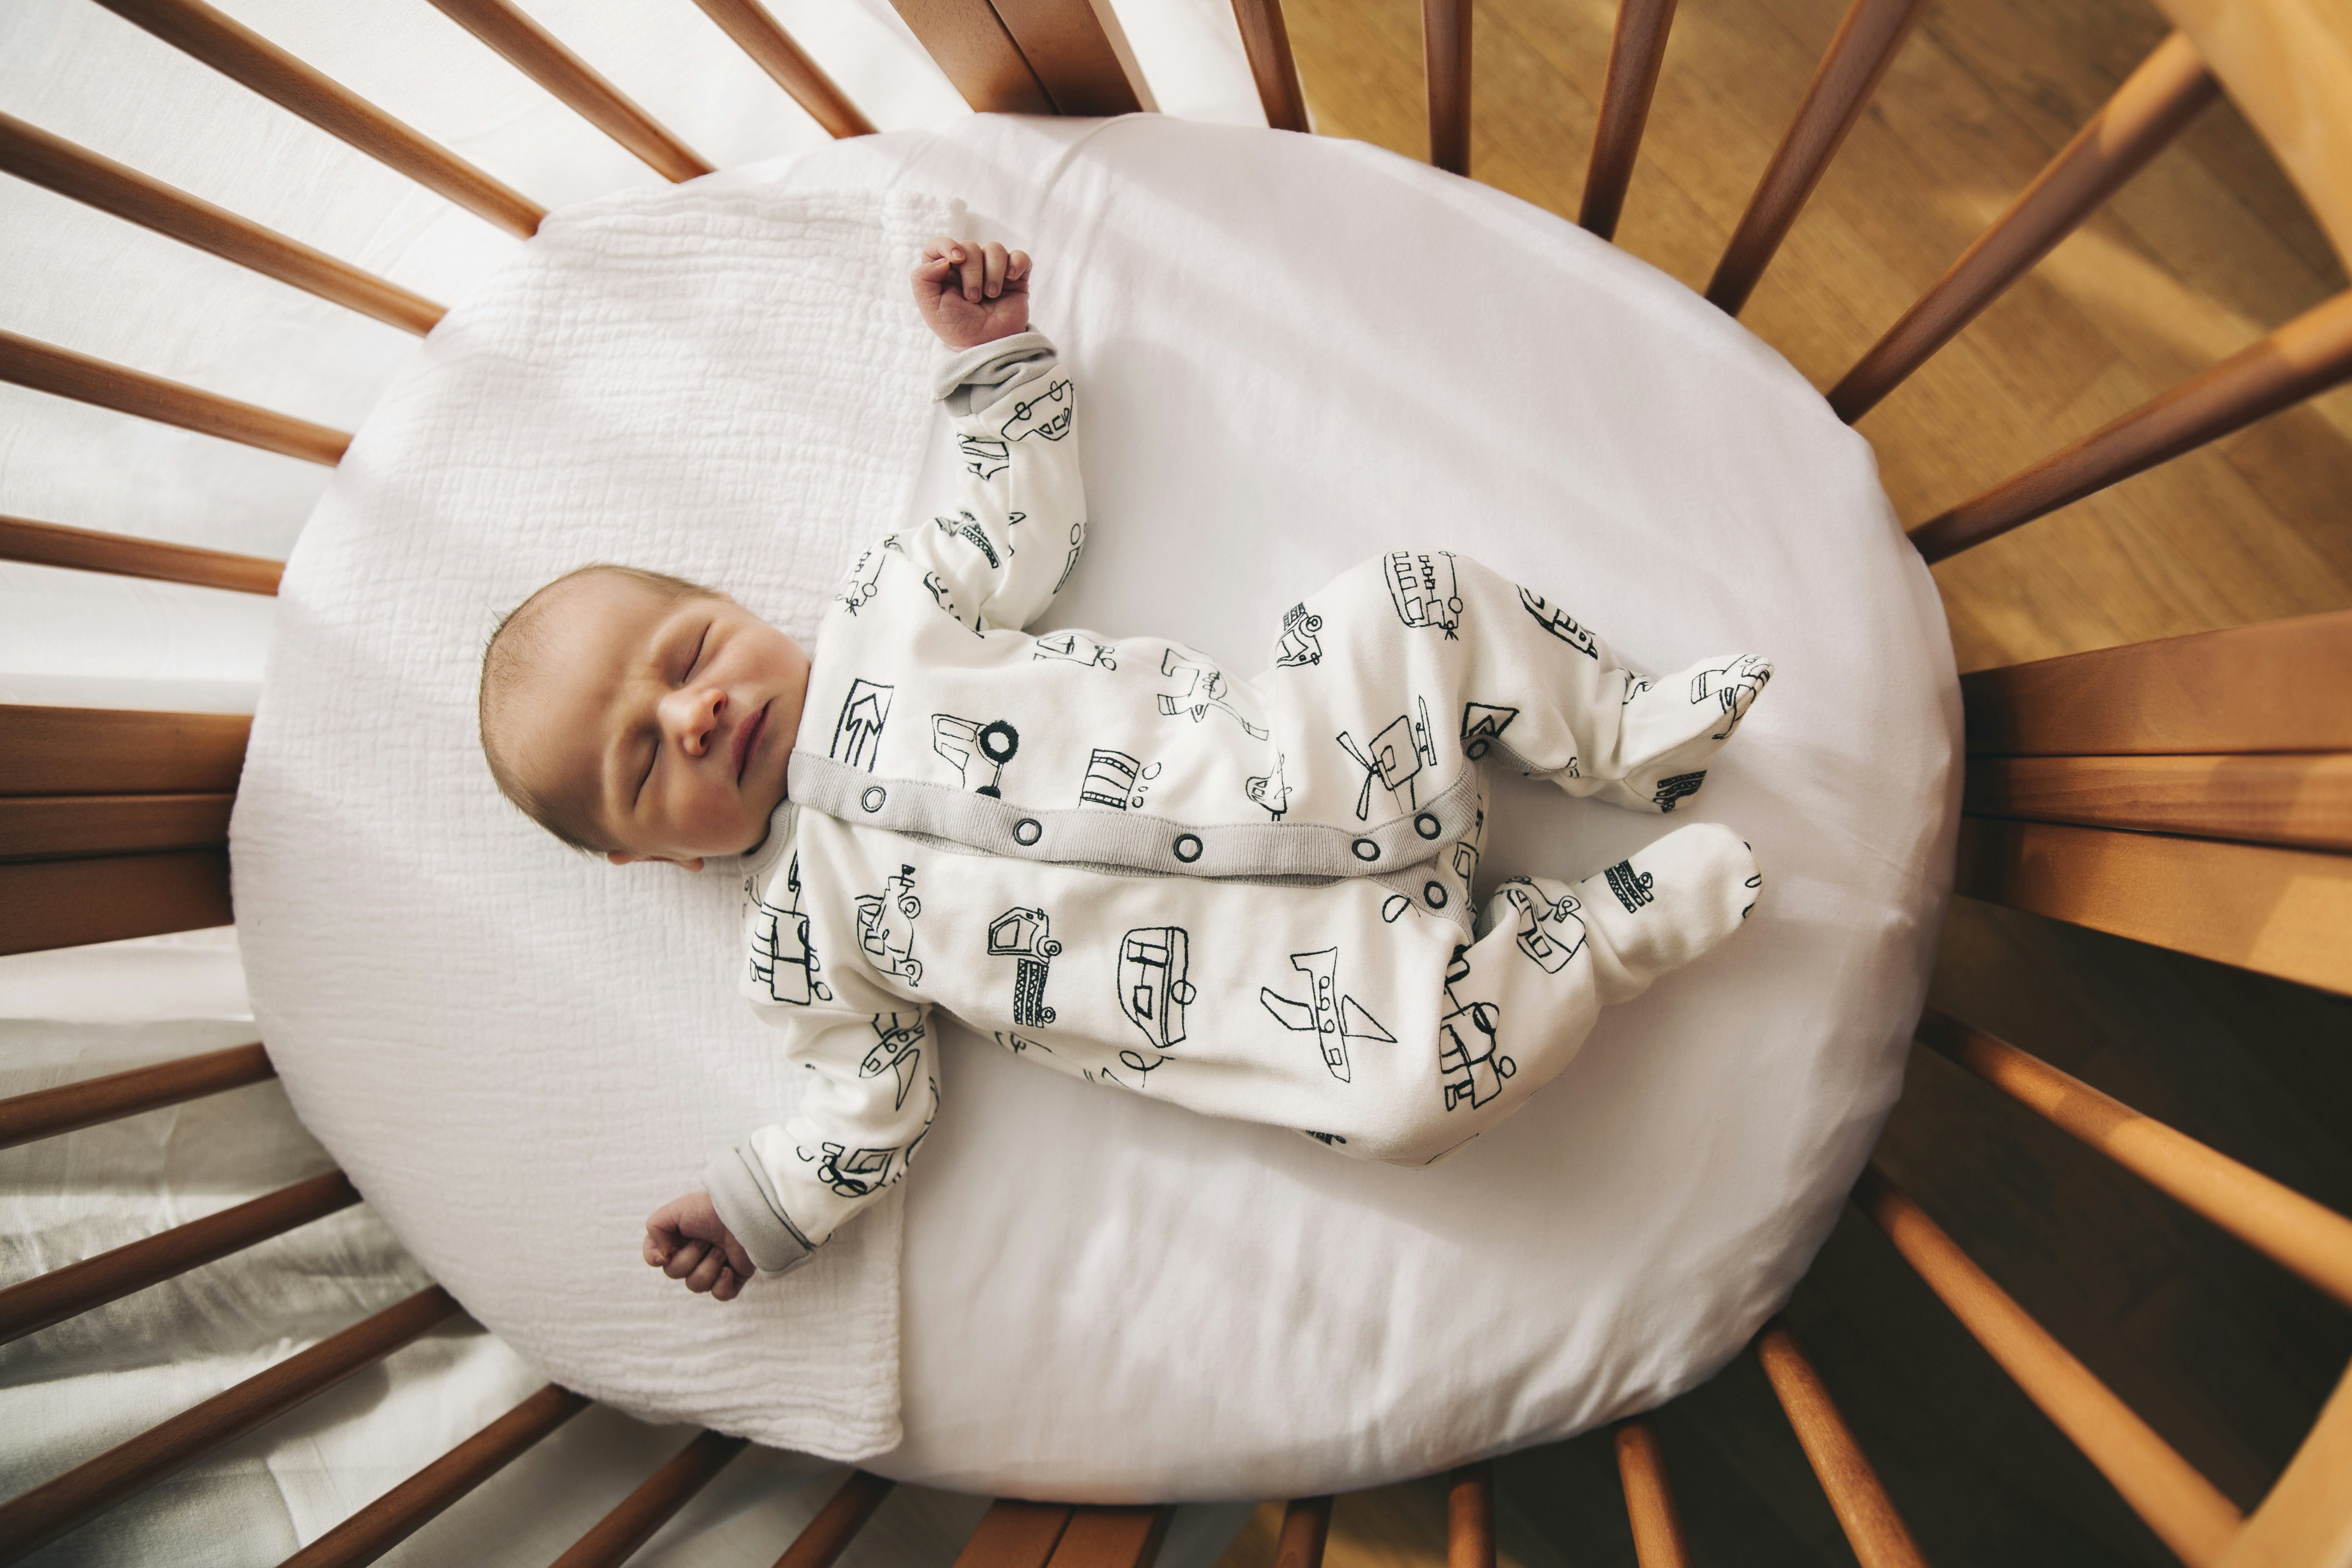 What is the safest room temperature for babies?